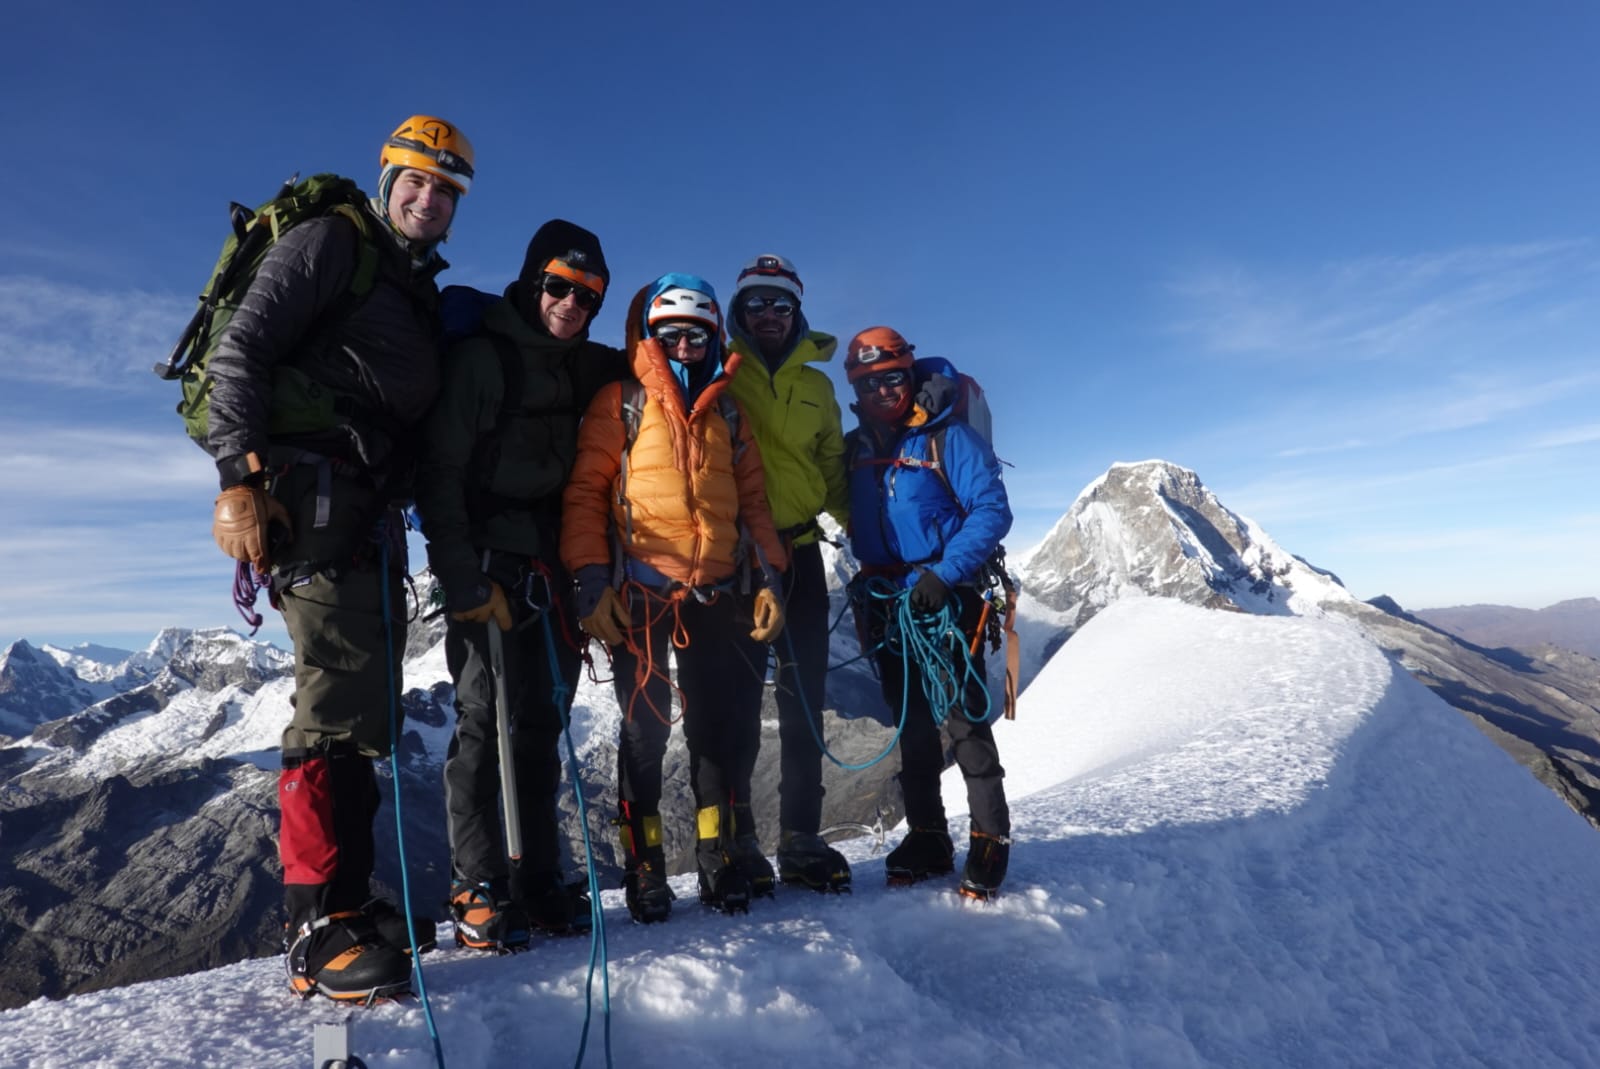 A group of 5 mountaineers standing on the summit of a peak in Peru.